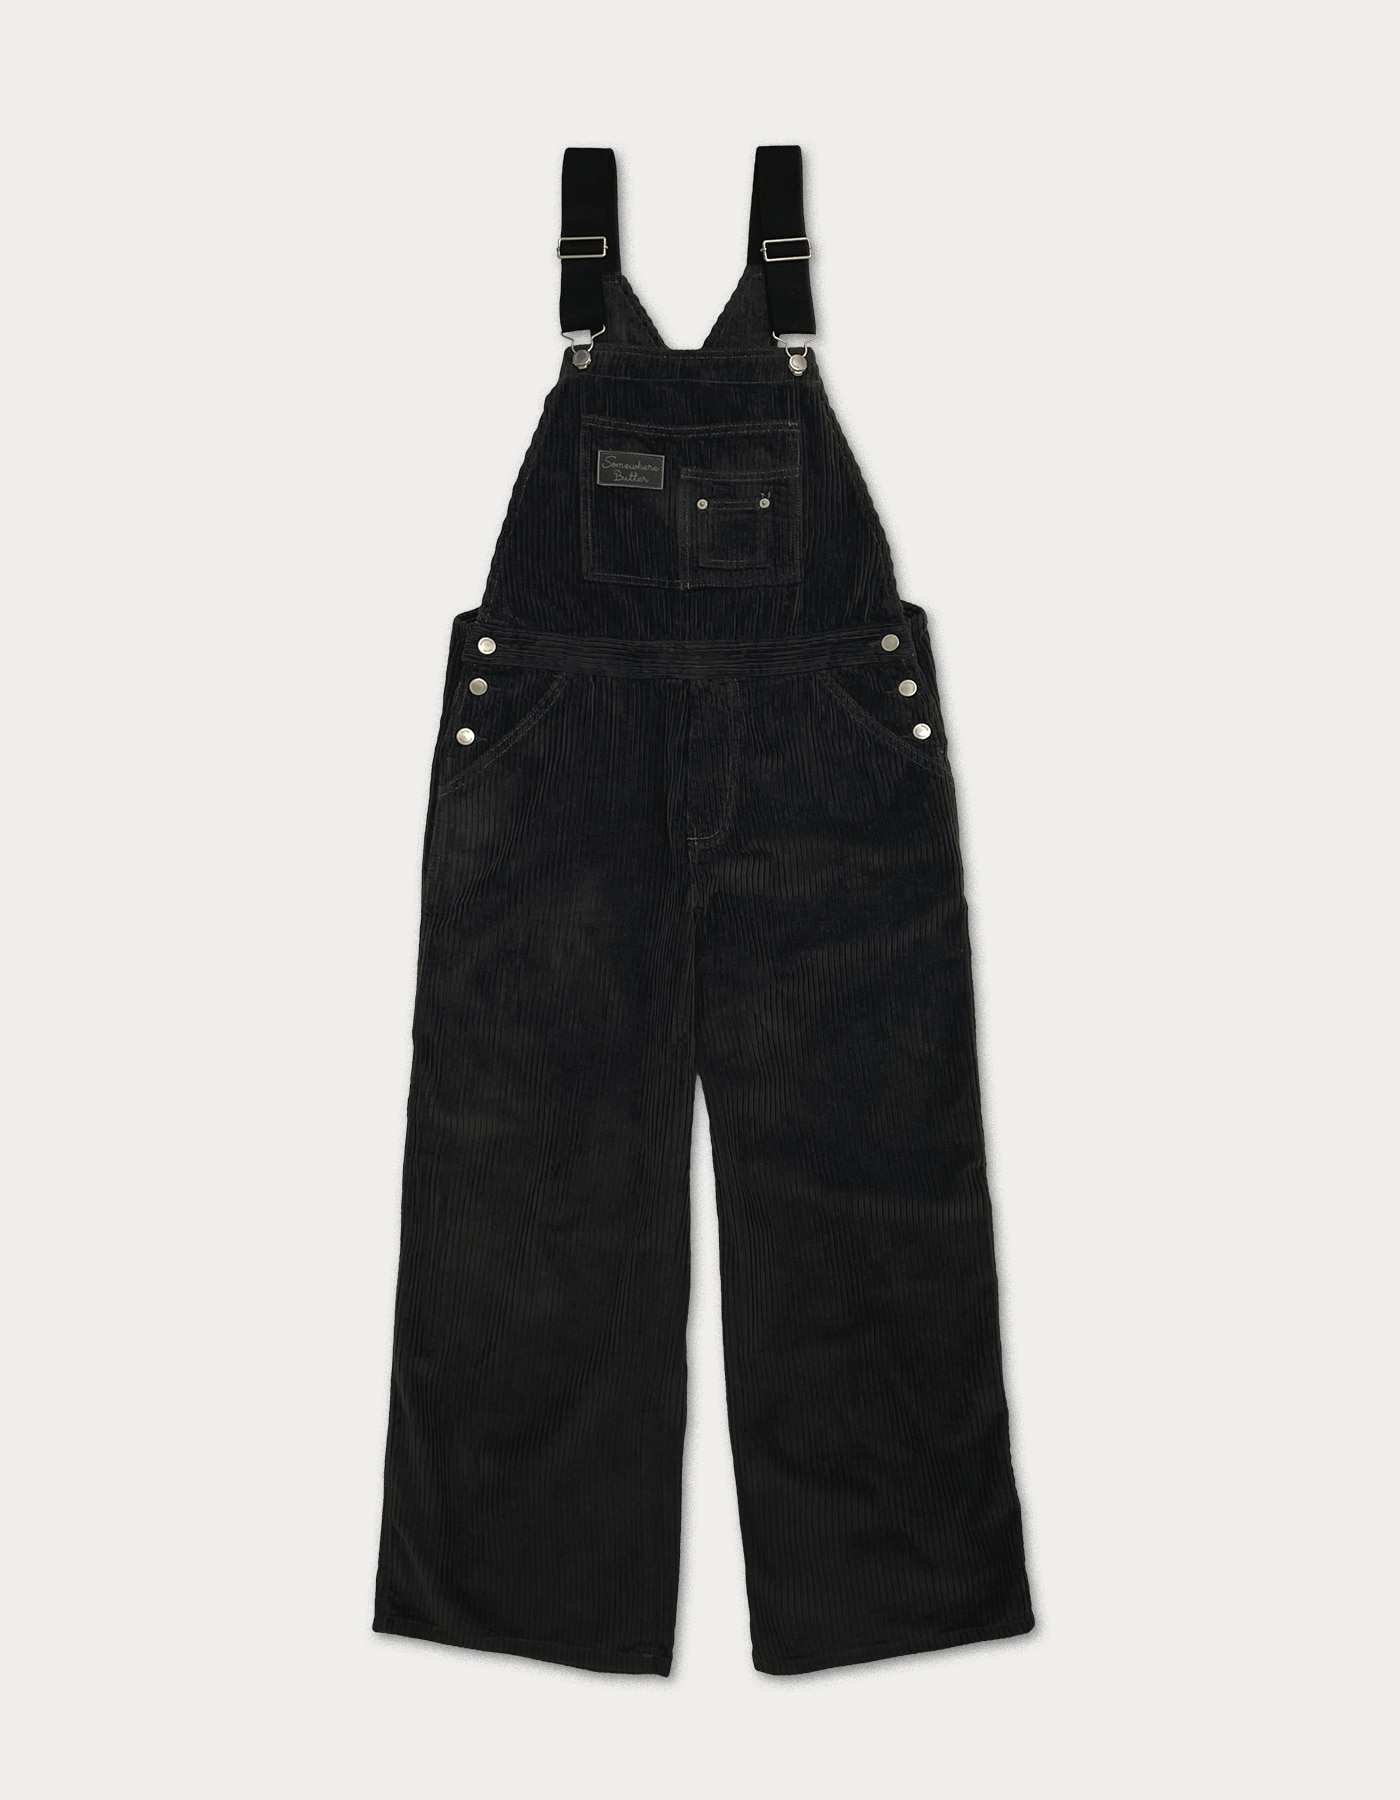 Corduroy letter patch overall - charcoal